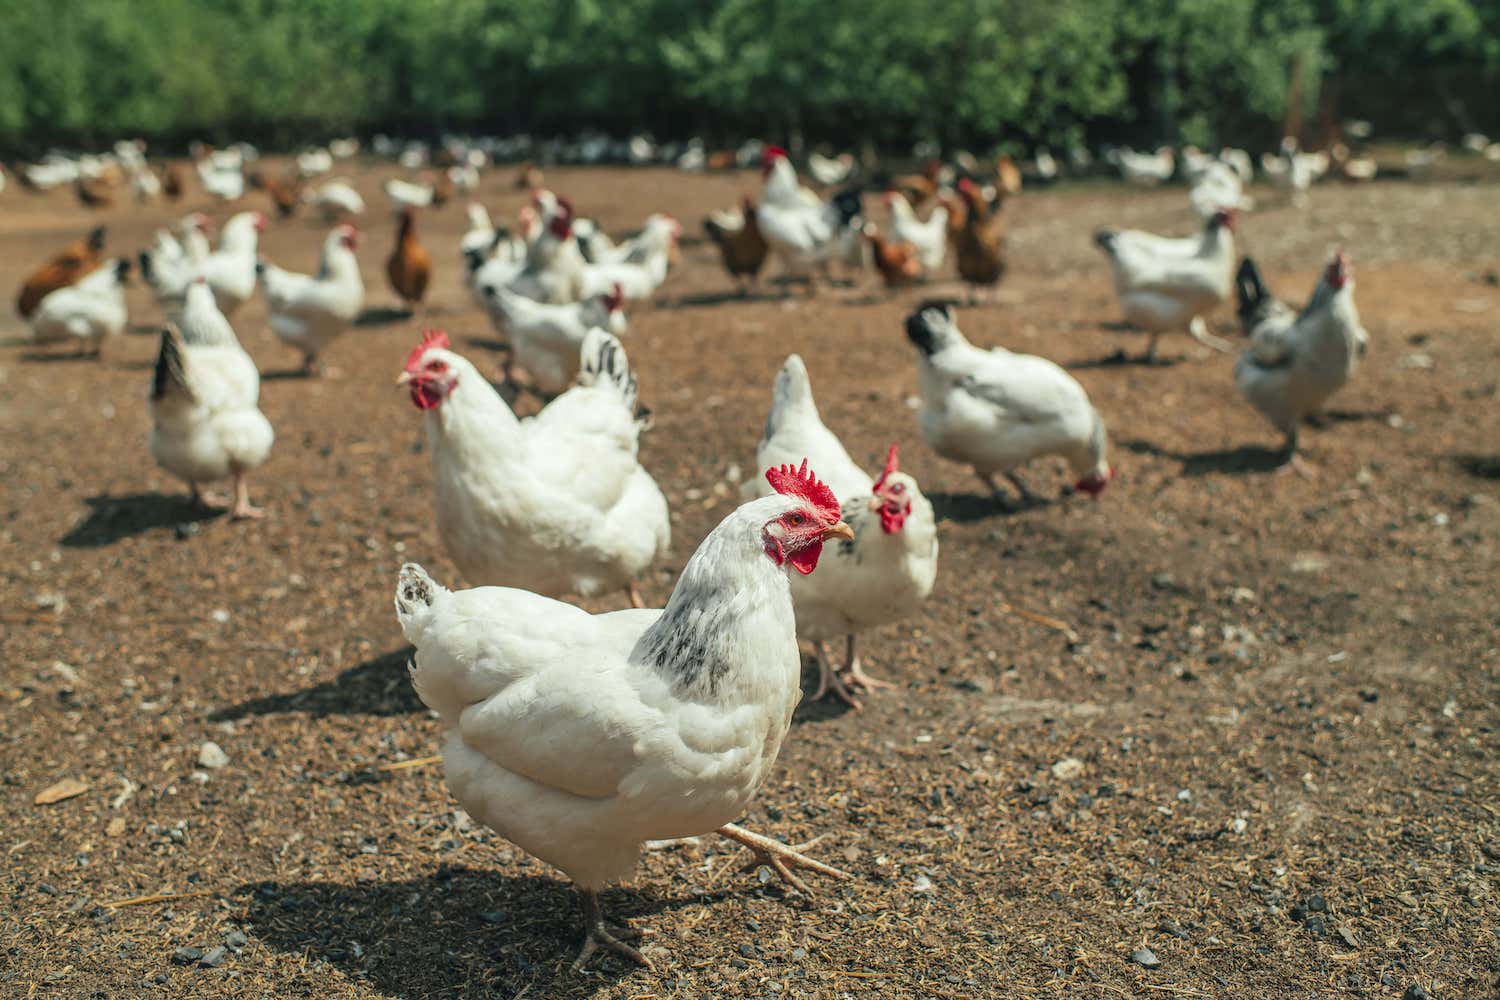 How to start a simple chicken farm?